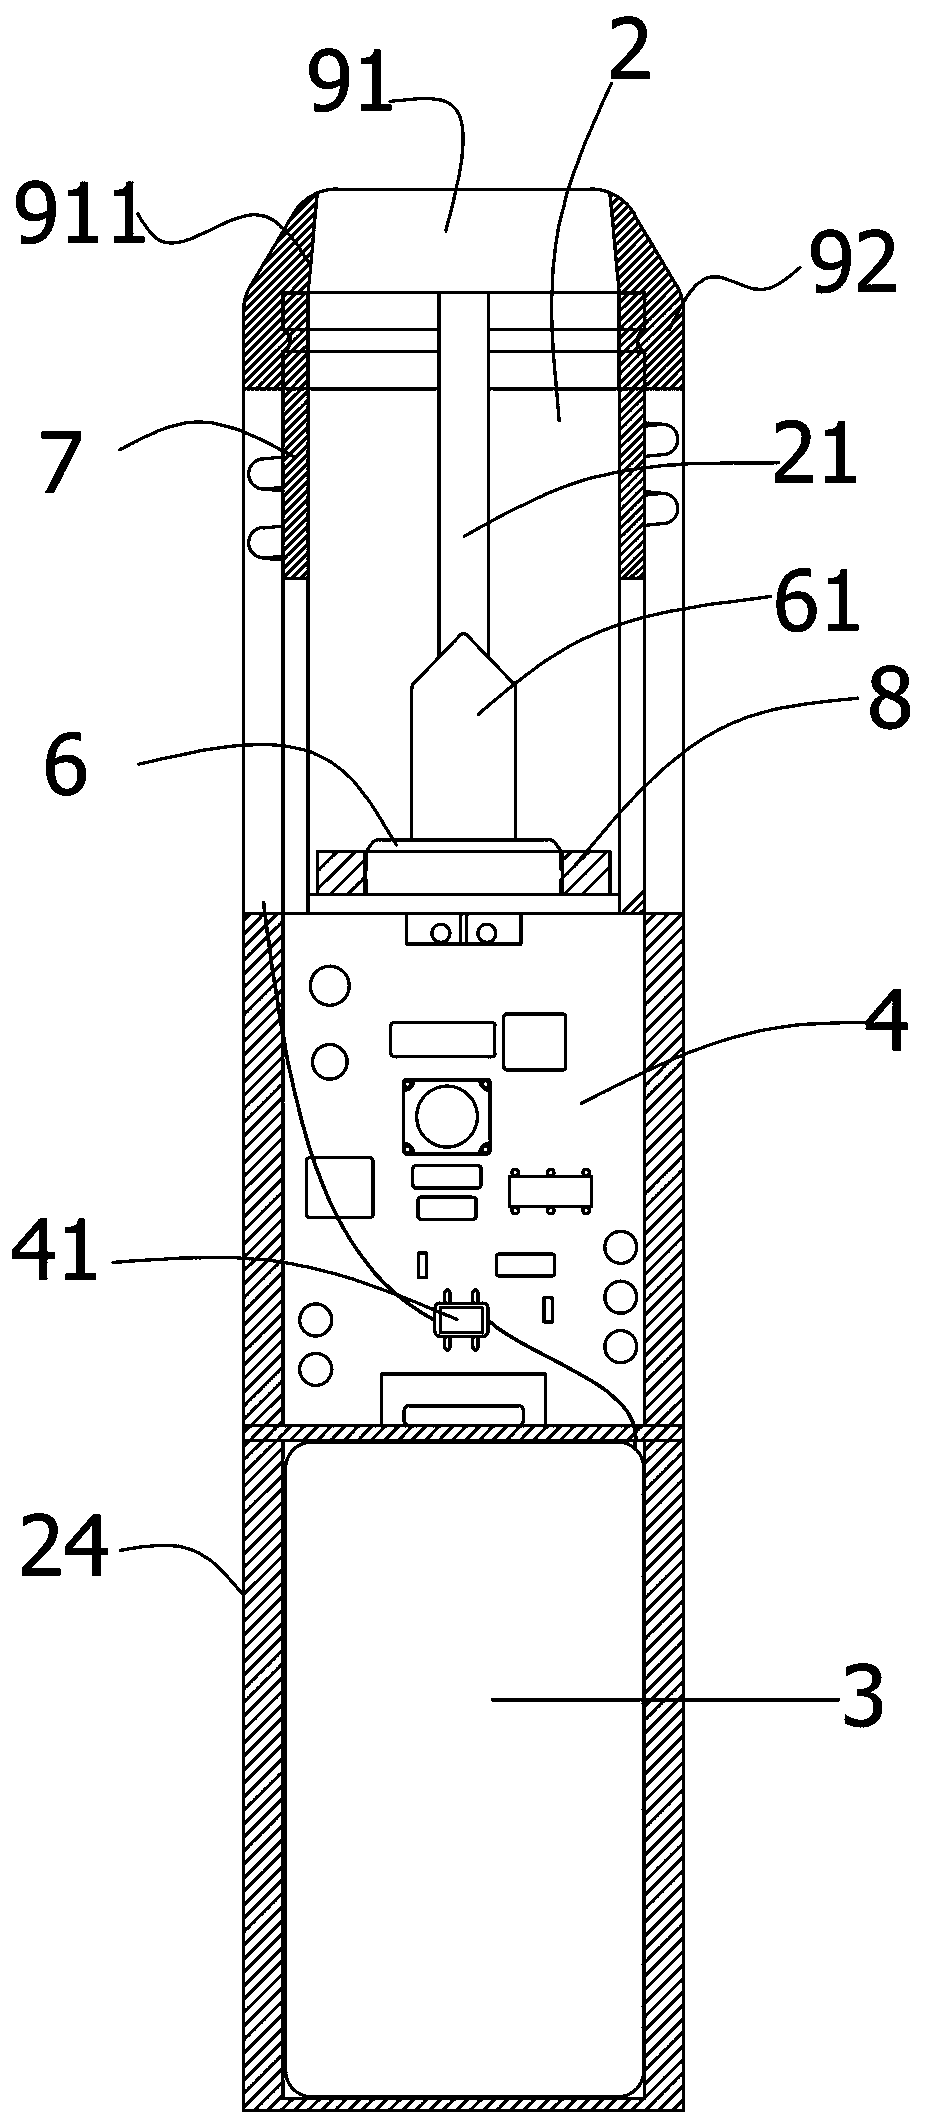 Heating non-combustion electronic cigarette appliance with smoke cartridge capable of automatically popping up